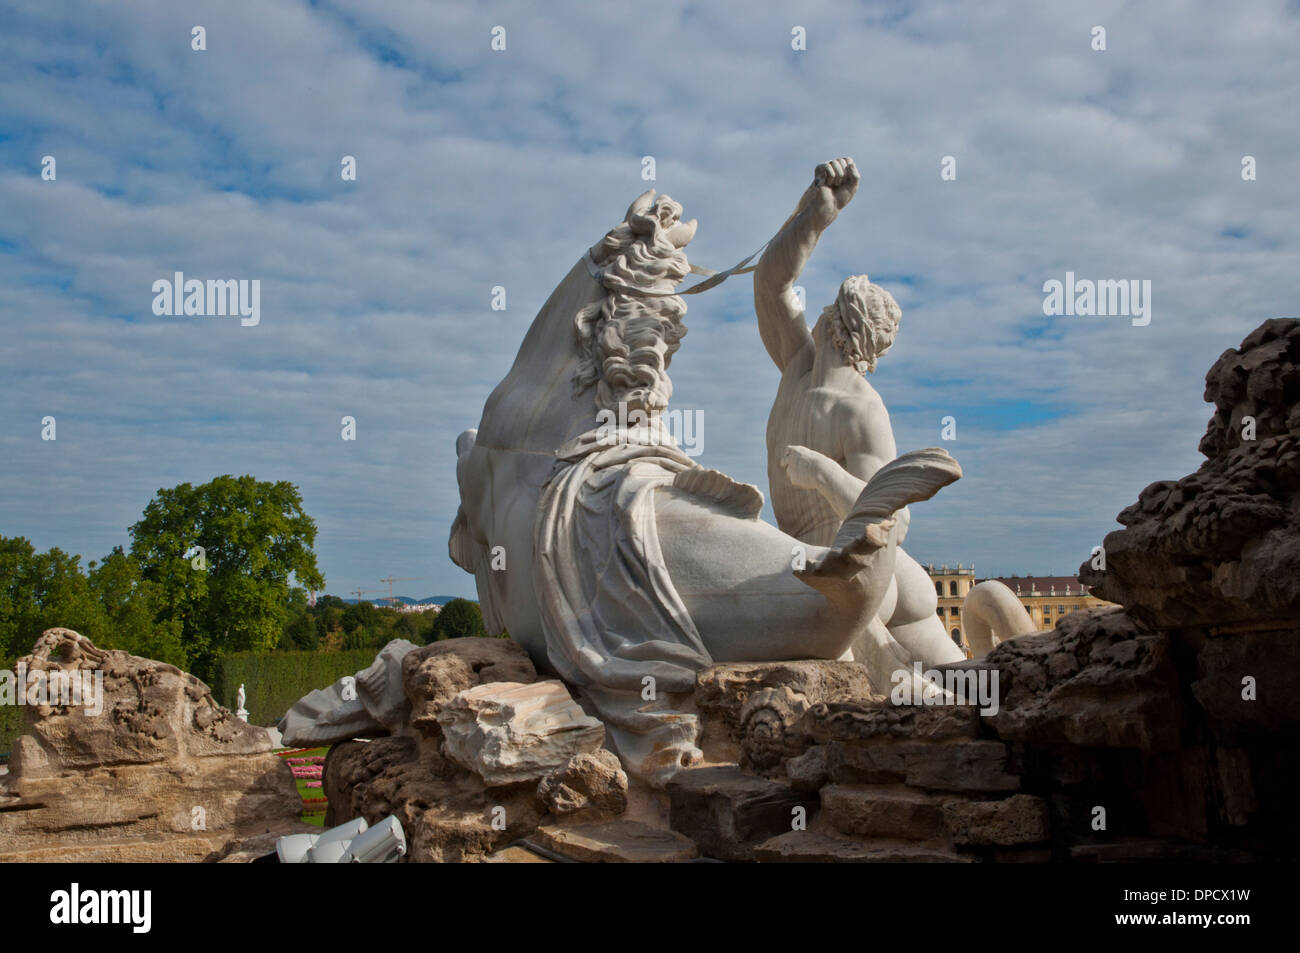 Schoenbrunn Palace and Gardens fountain statuary as seen from behind Stock Photo